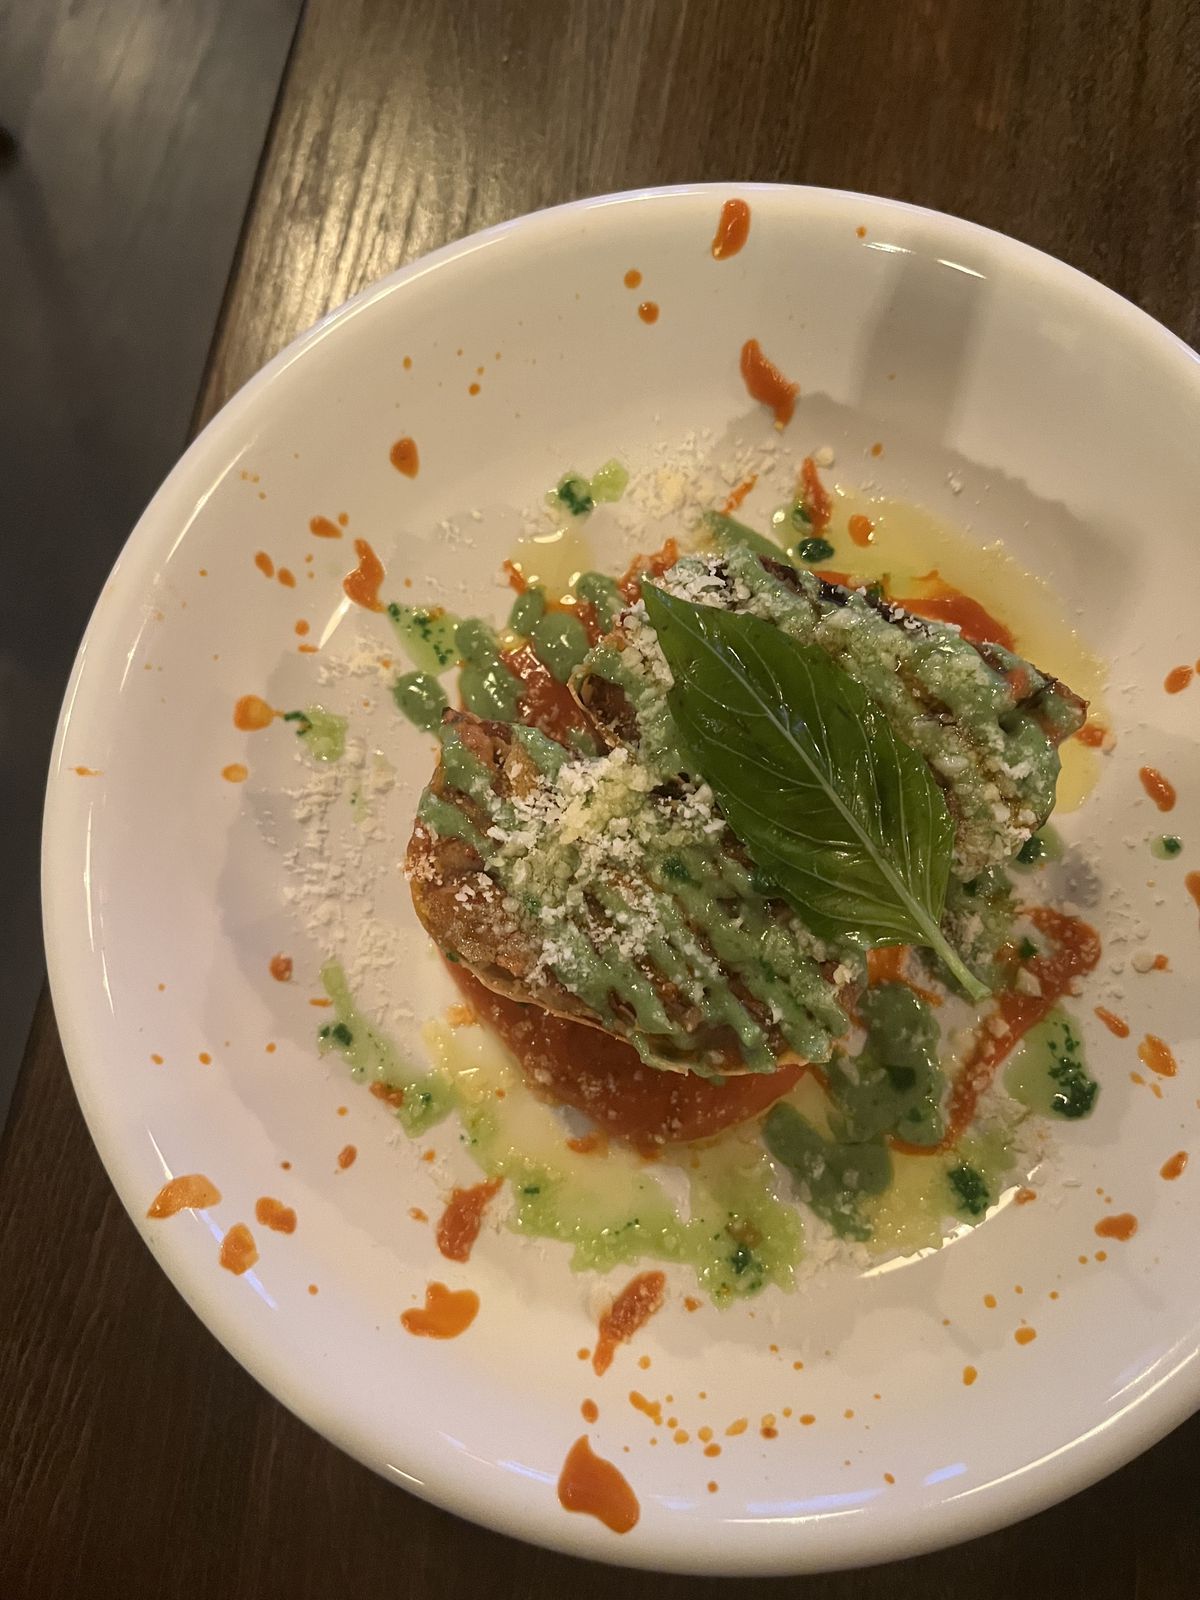 A baked eggplant dish with green and orange sauces splattered around the plate and a green basil leaf set on top.